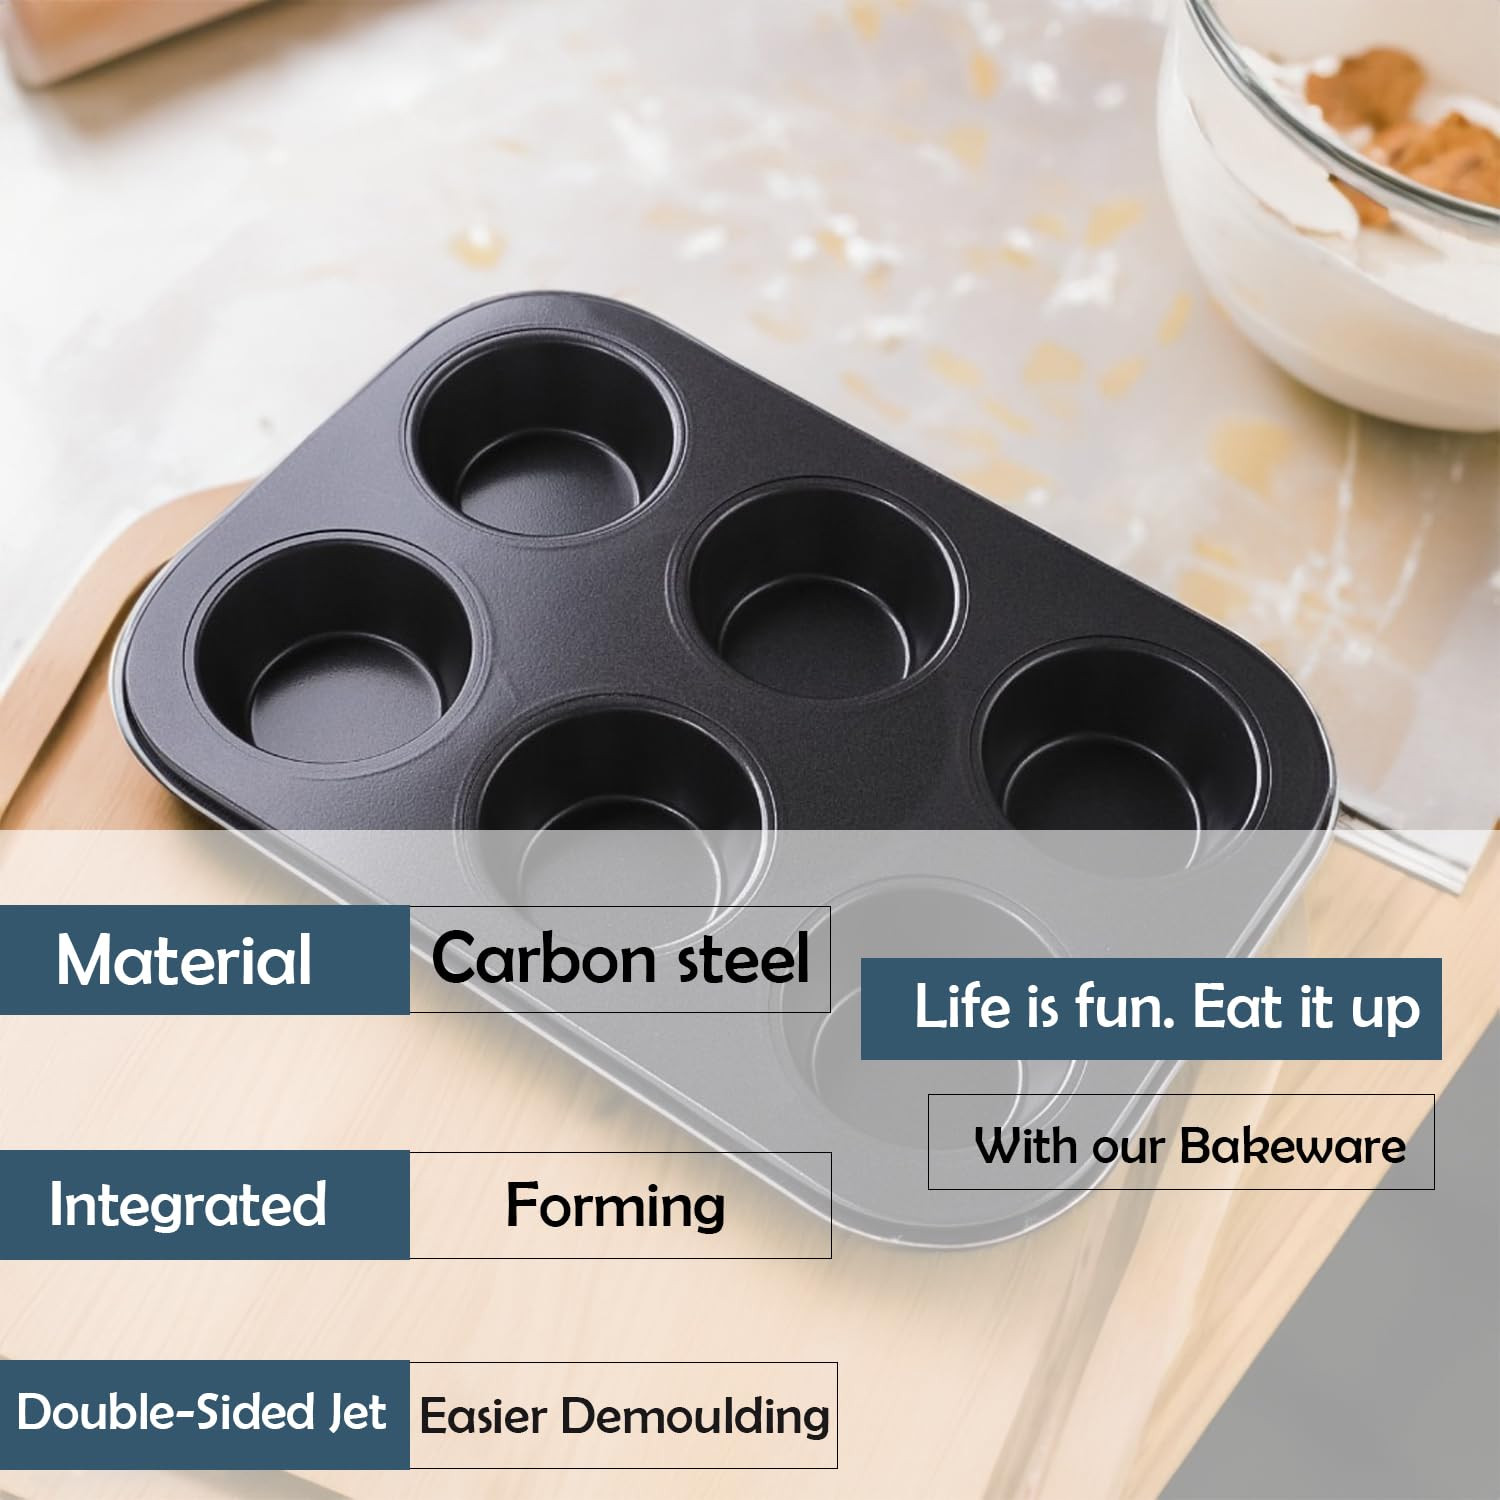 Kuber Industries 6 Slots Non-Stick Cup Cake Tray|Cup Cake Mould for Baking|Idol for Muffin, Small Cake (Black)